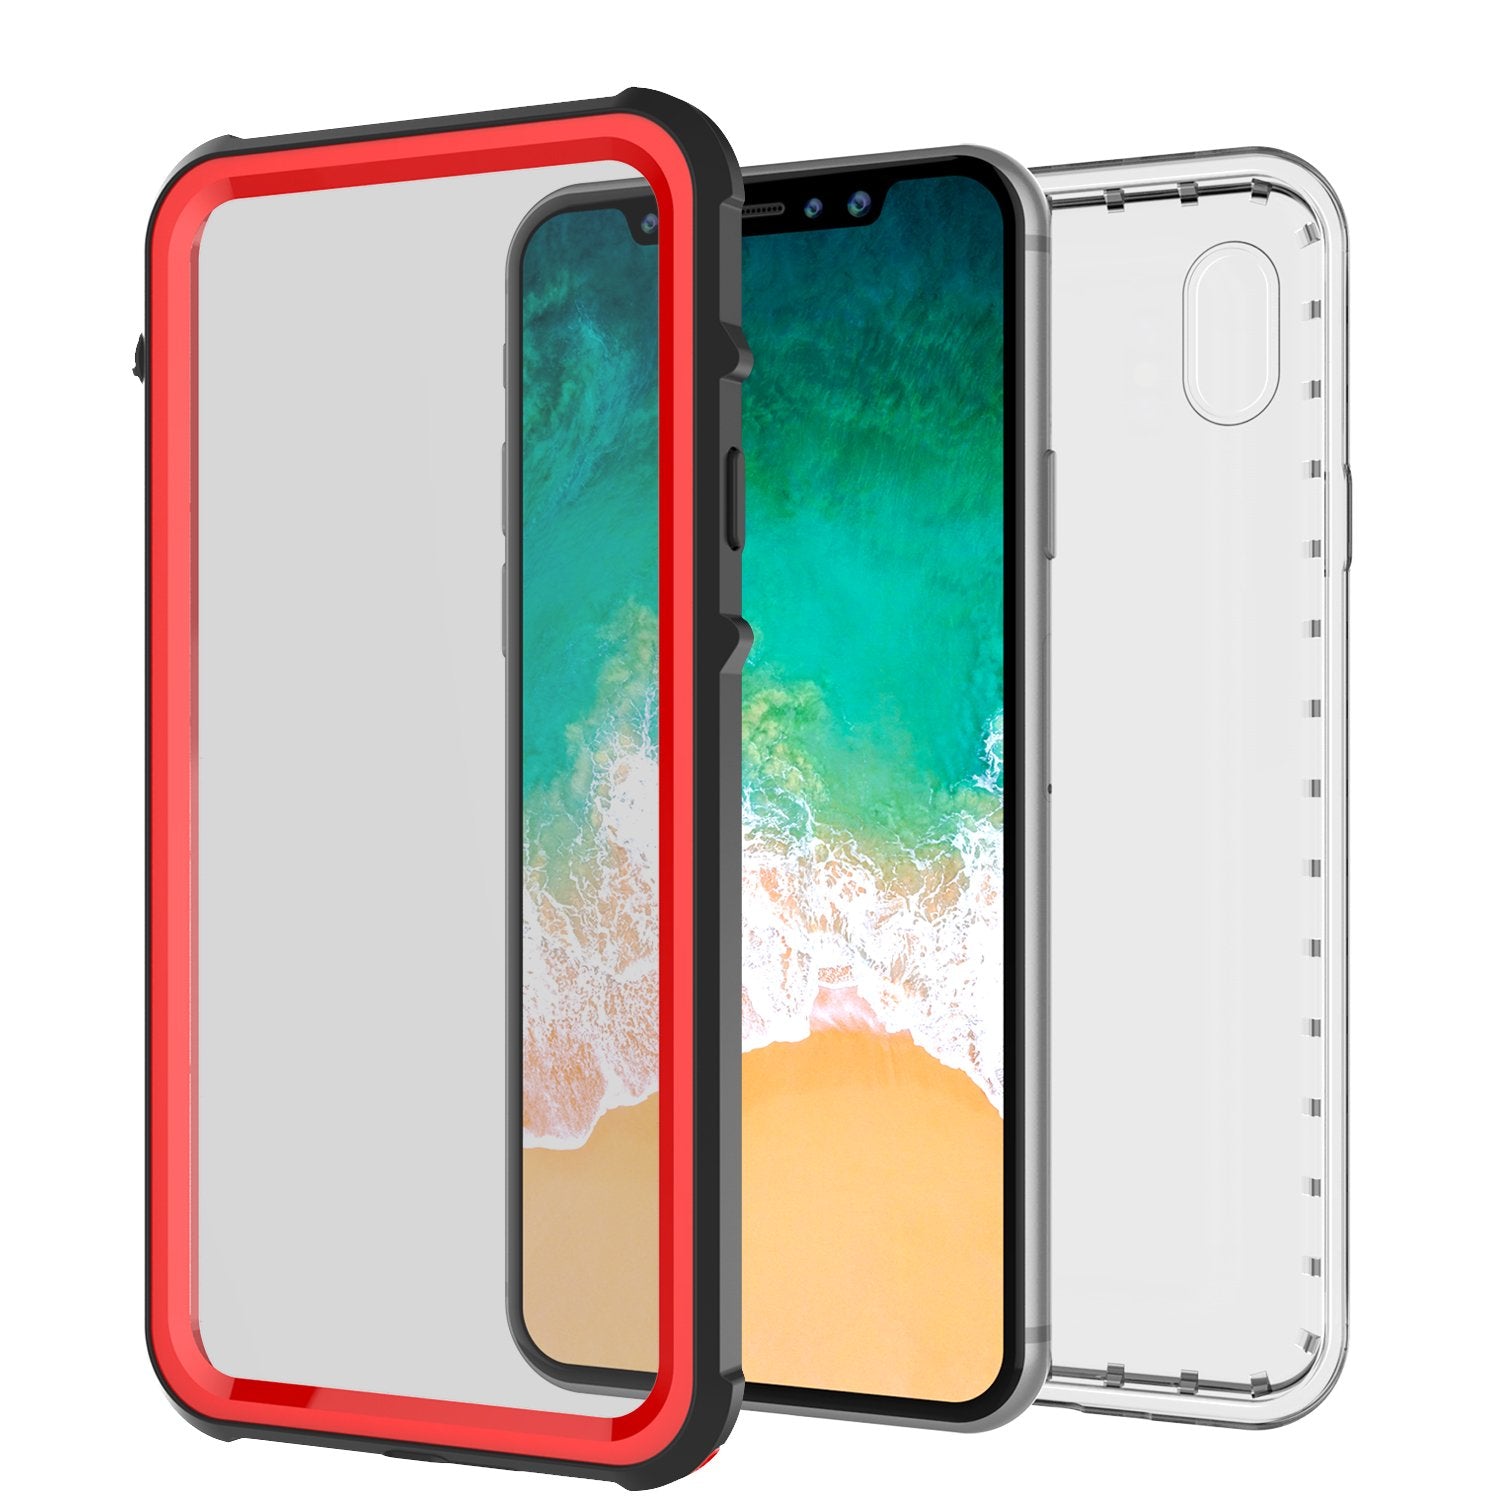 iPhone X Case, PUNKCase [CRYSTAL SERIES] Protective IP68 Certified Cover W/ Attached Screen Protector - DustPROOF, ShockPROOF, SnowPROOF - Ultra Slim Fit for Apple iPhone 10 [RED]